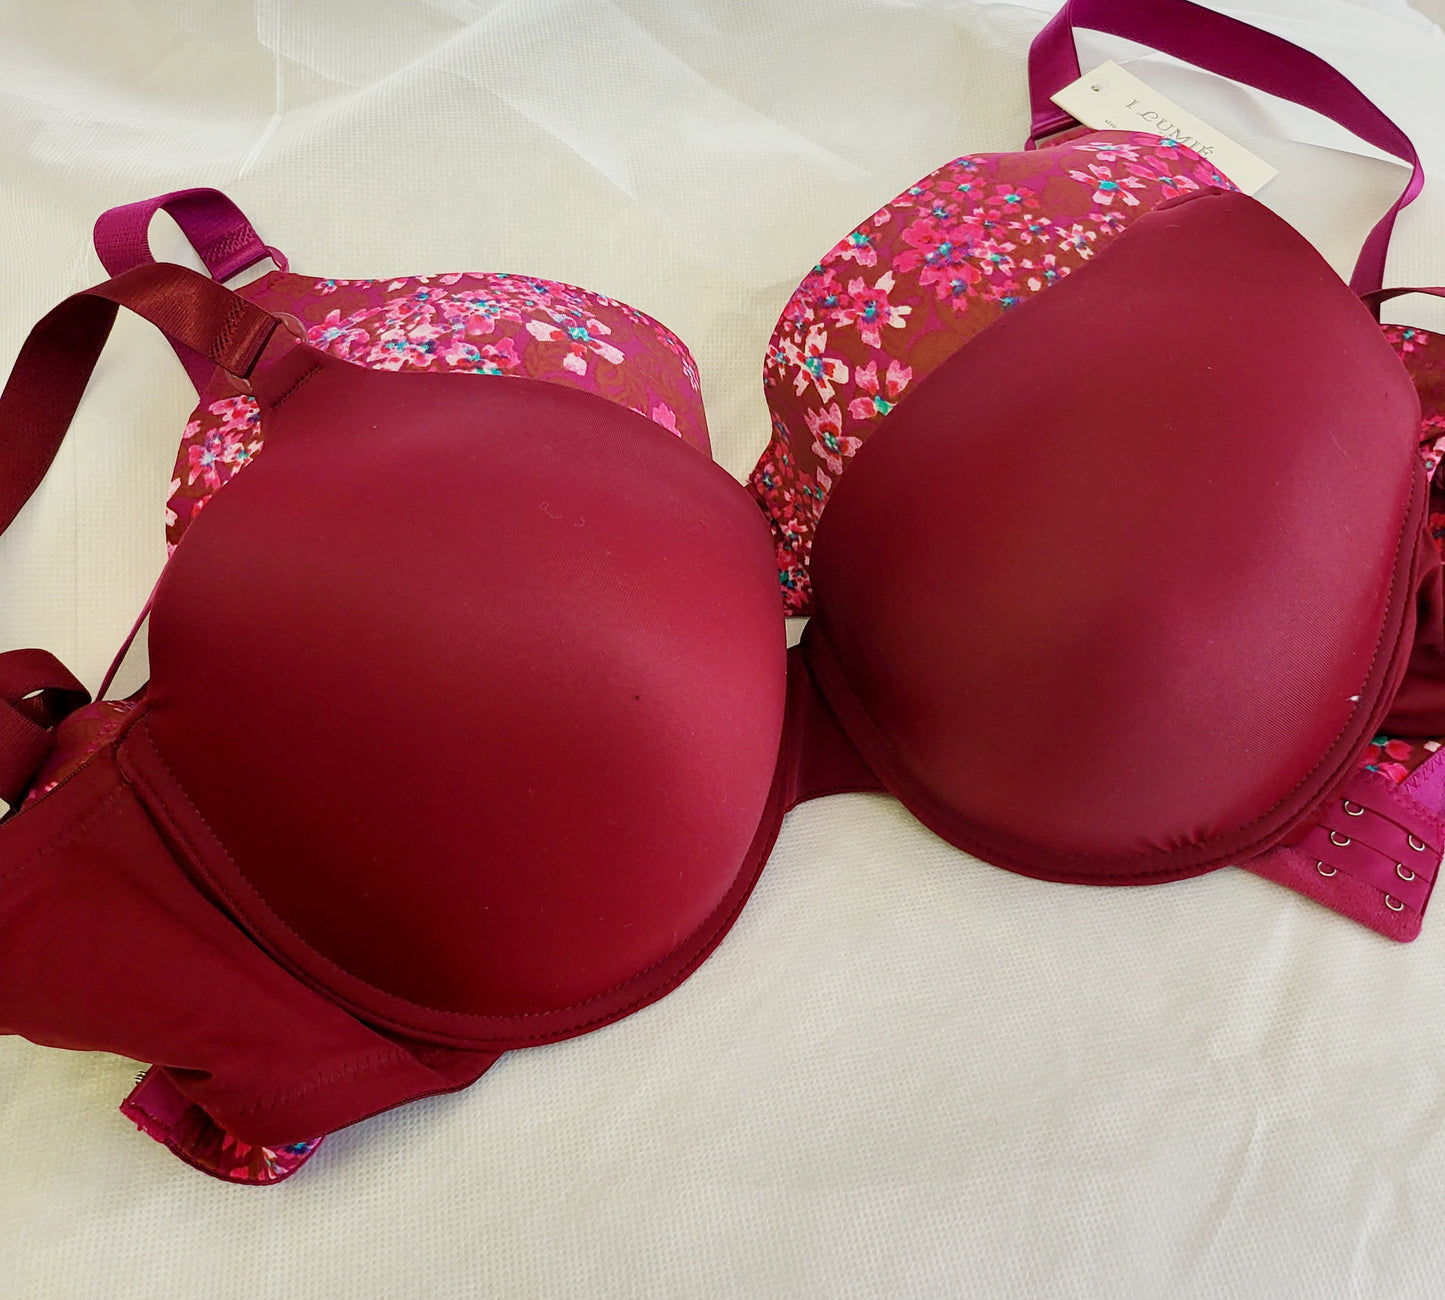 Soft Comfy Natural Everyday Bra Set 2 pack Curvy Queen Size 42D